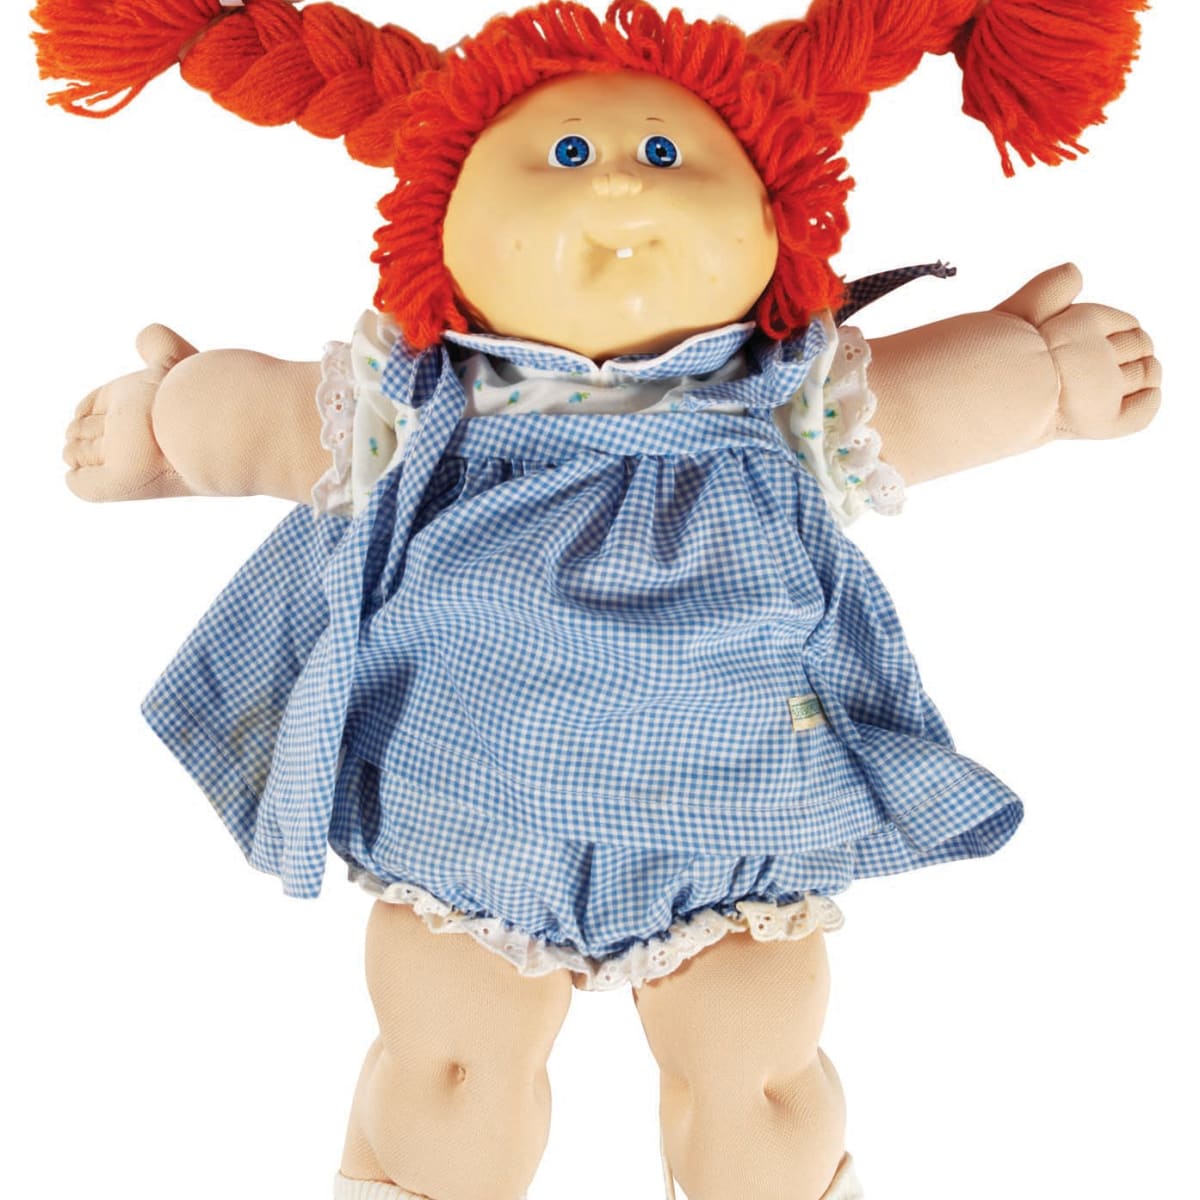 1984 cabbage patch doll worth